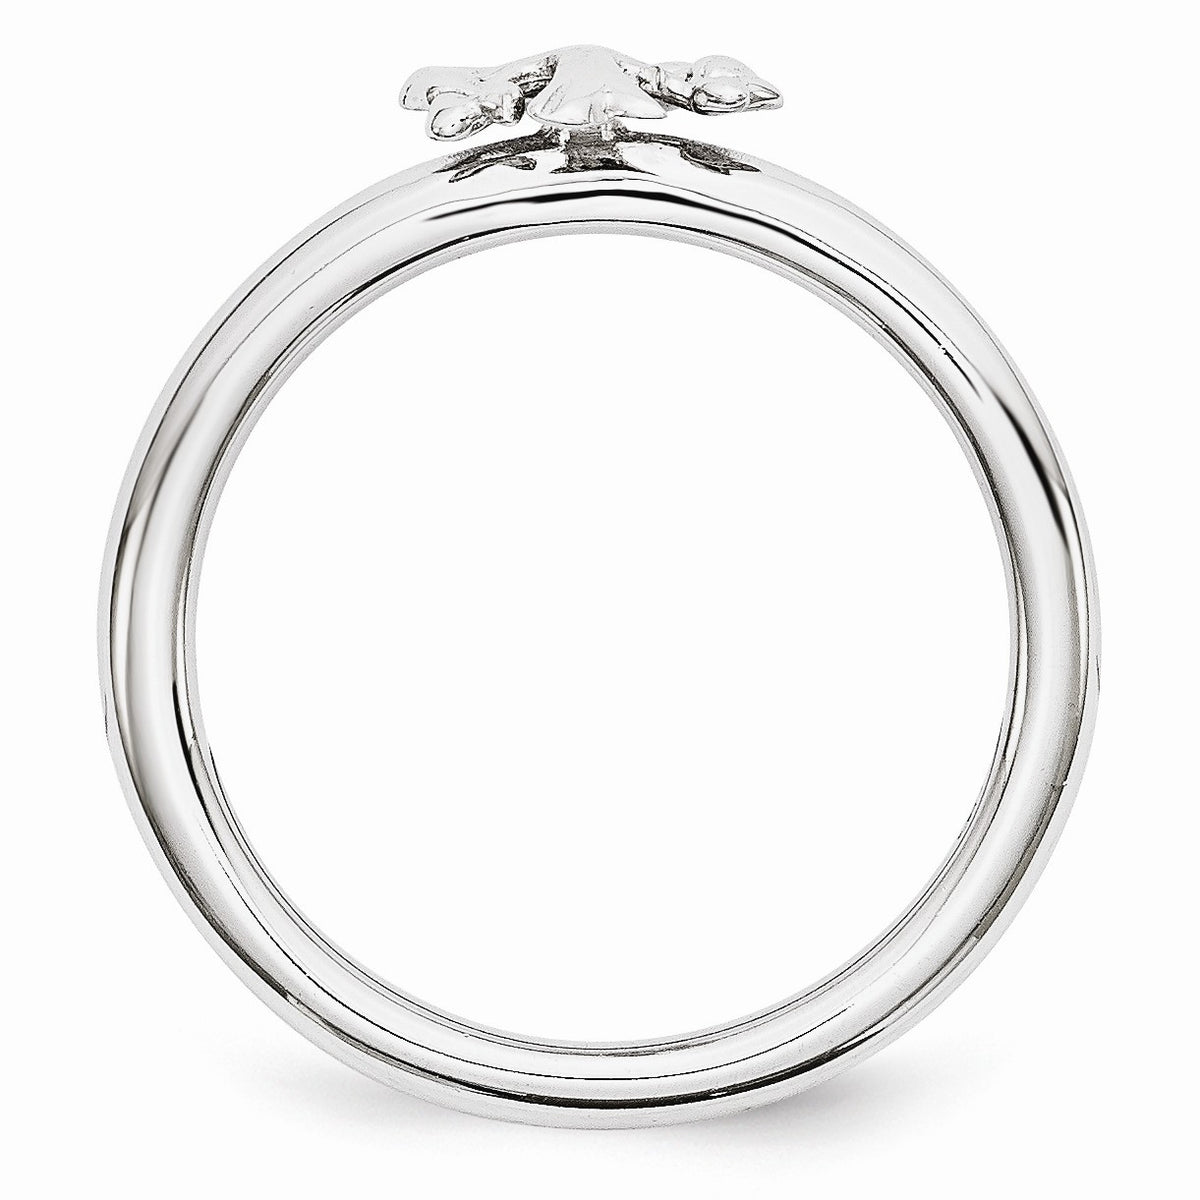 Alternate view of the Rhodium Plated Sterling Silver Stackable Expressions 8mm Tree Ring by The Black Bow Jewelry Co.